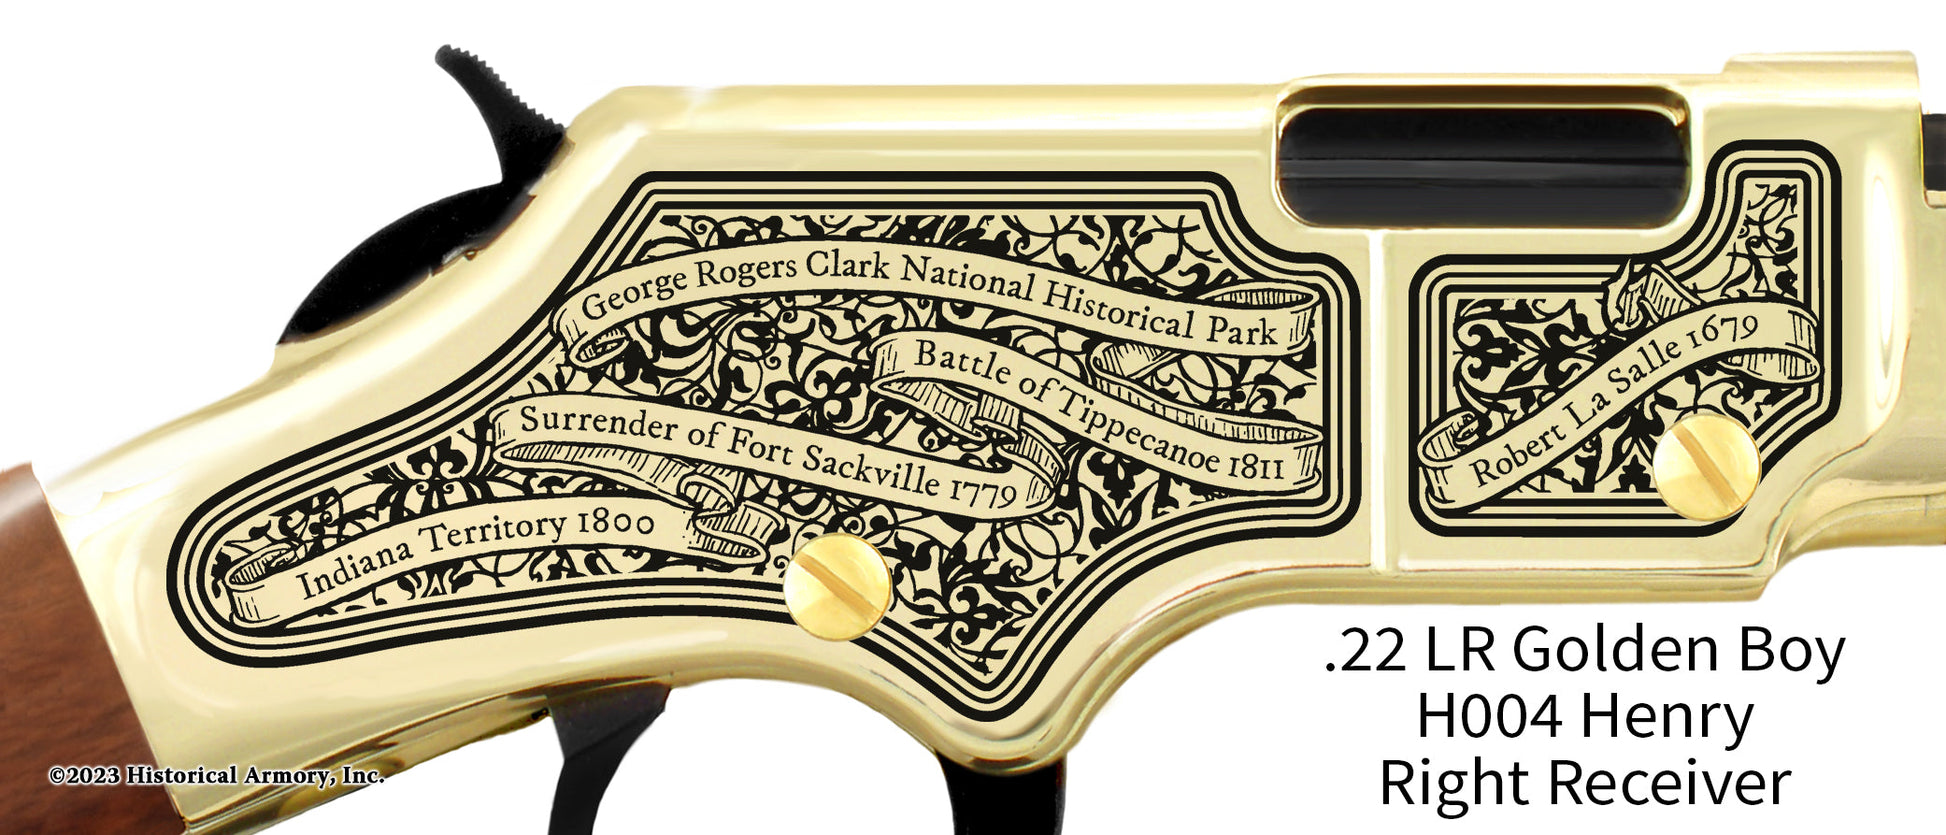 Indiana State Pride Engraved Golden Boy Receiver detail Henry Rifle